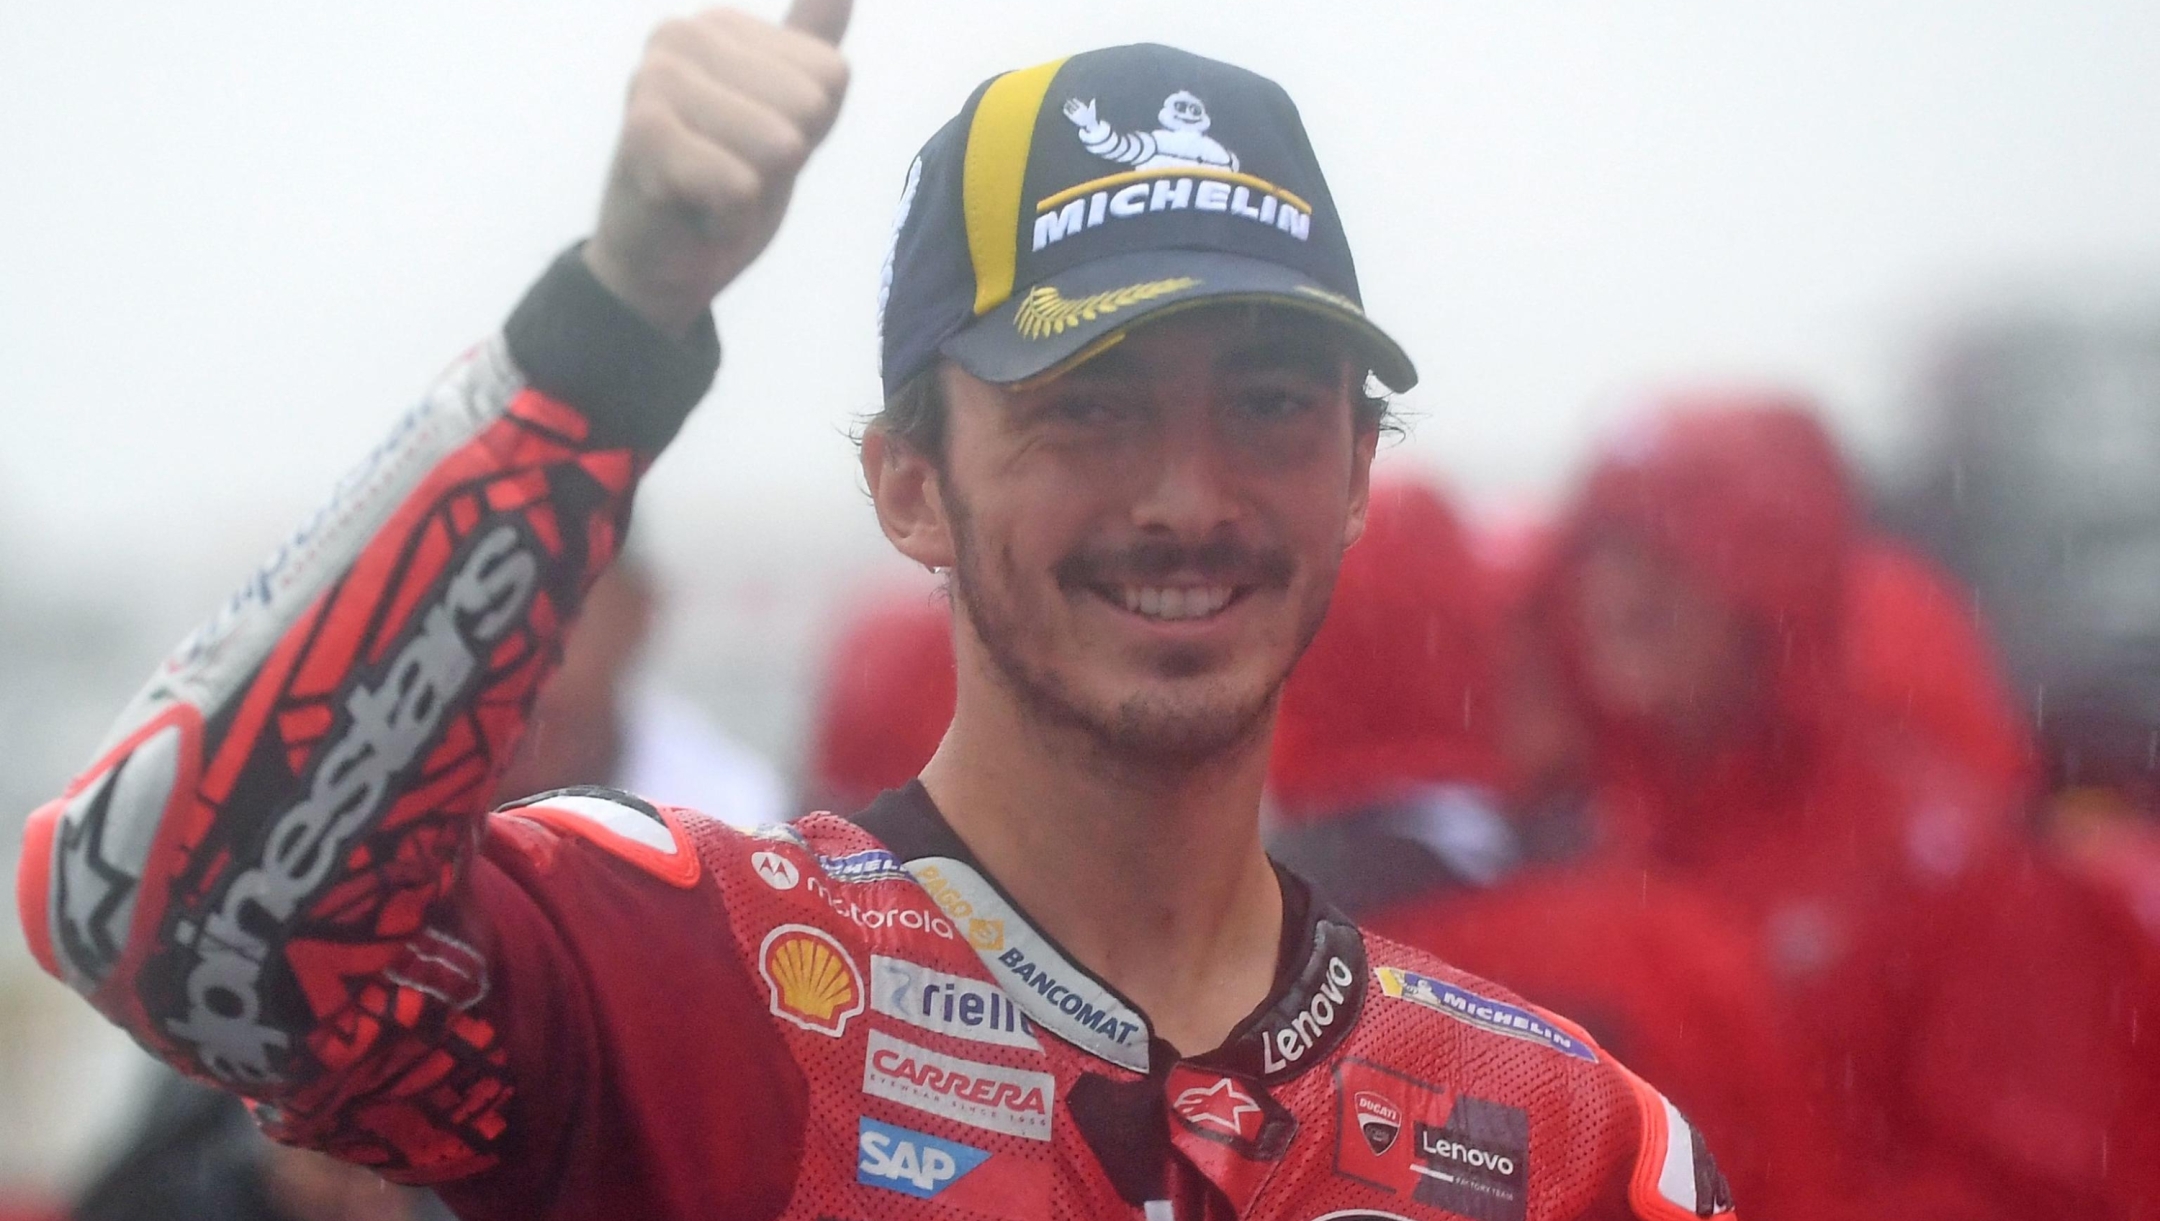 Ducati Lenovo Team rider Francesco Bagnaia of Italy celebrates his second place finish at the parc ferme of the MotoGP Japanese Grand Prix at the Mobility Resort Motegi in Motegi, Tochigi prefecture on October 1, 2023. (Photo by Toshifumi KITAMURA / AFP)